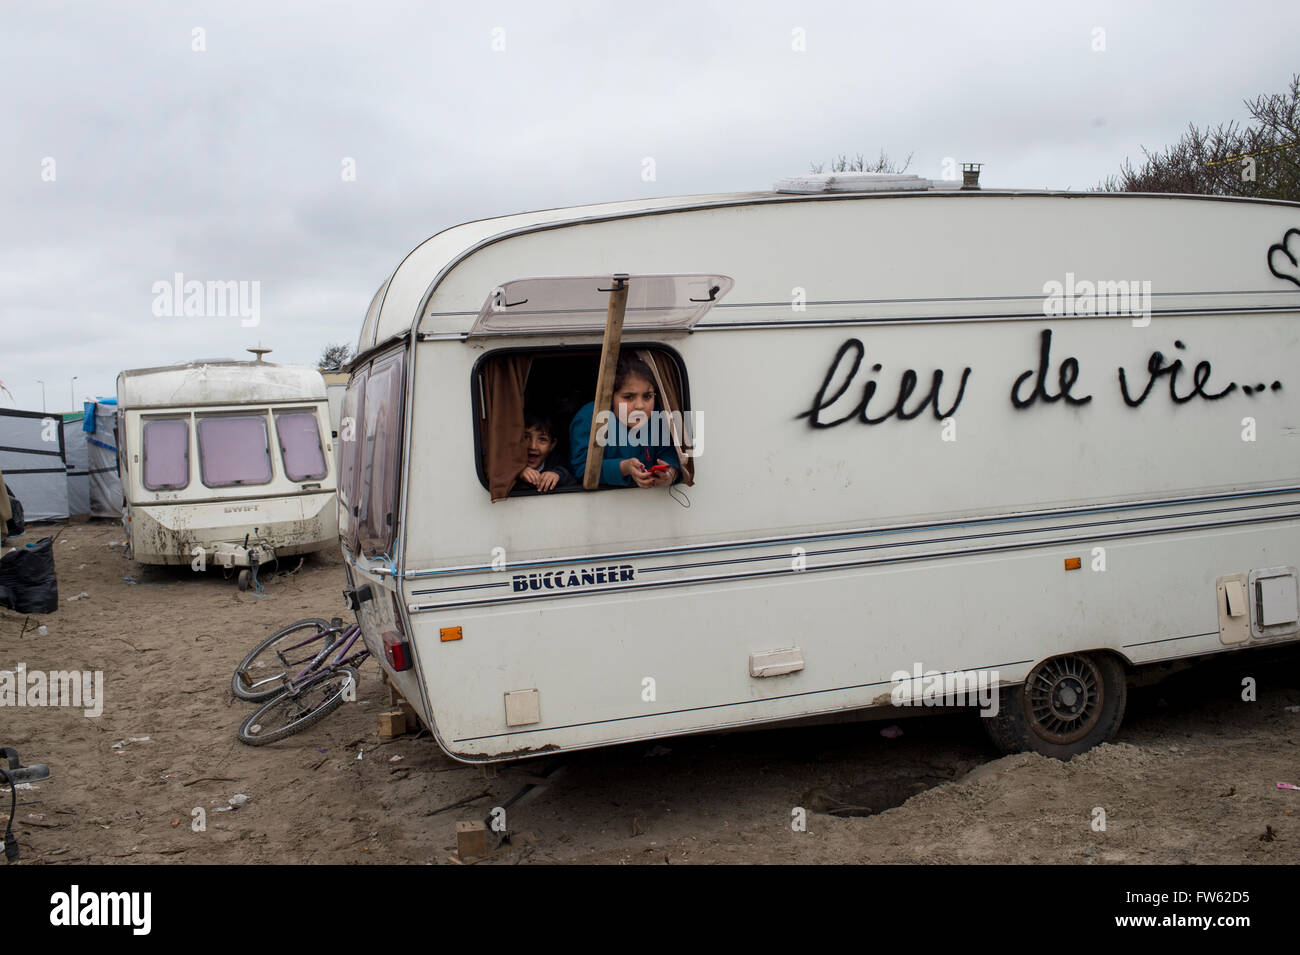 France, Calais. Refugee camp - the so-called Jungle. Two young Kurdish Iraqi refugee children look out of a caravan window Stock Photo